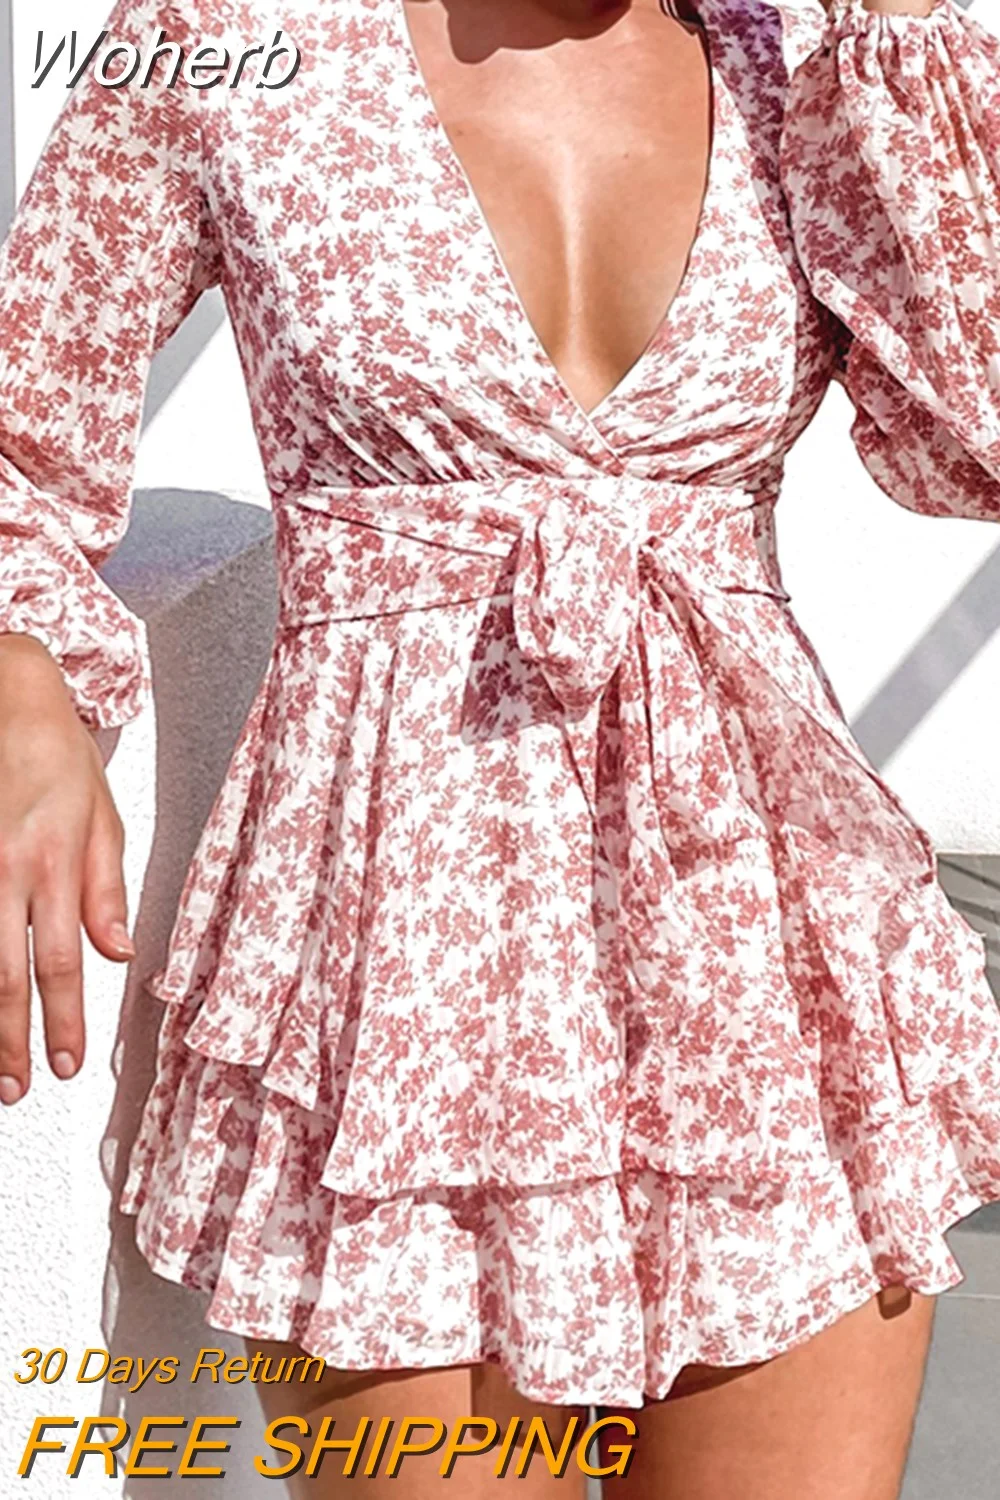 Woherb Fahion V Neck Chiffon Jumpsuit Women Ruffled Lace Up Long Sleeve Playsuit Floral Print Sweet Rompers